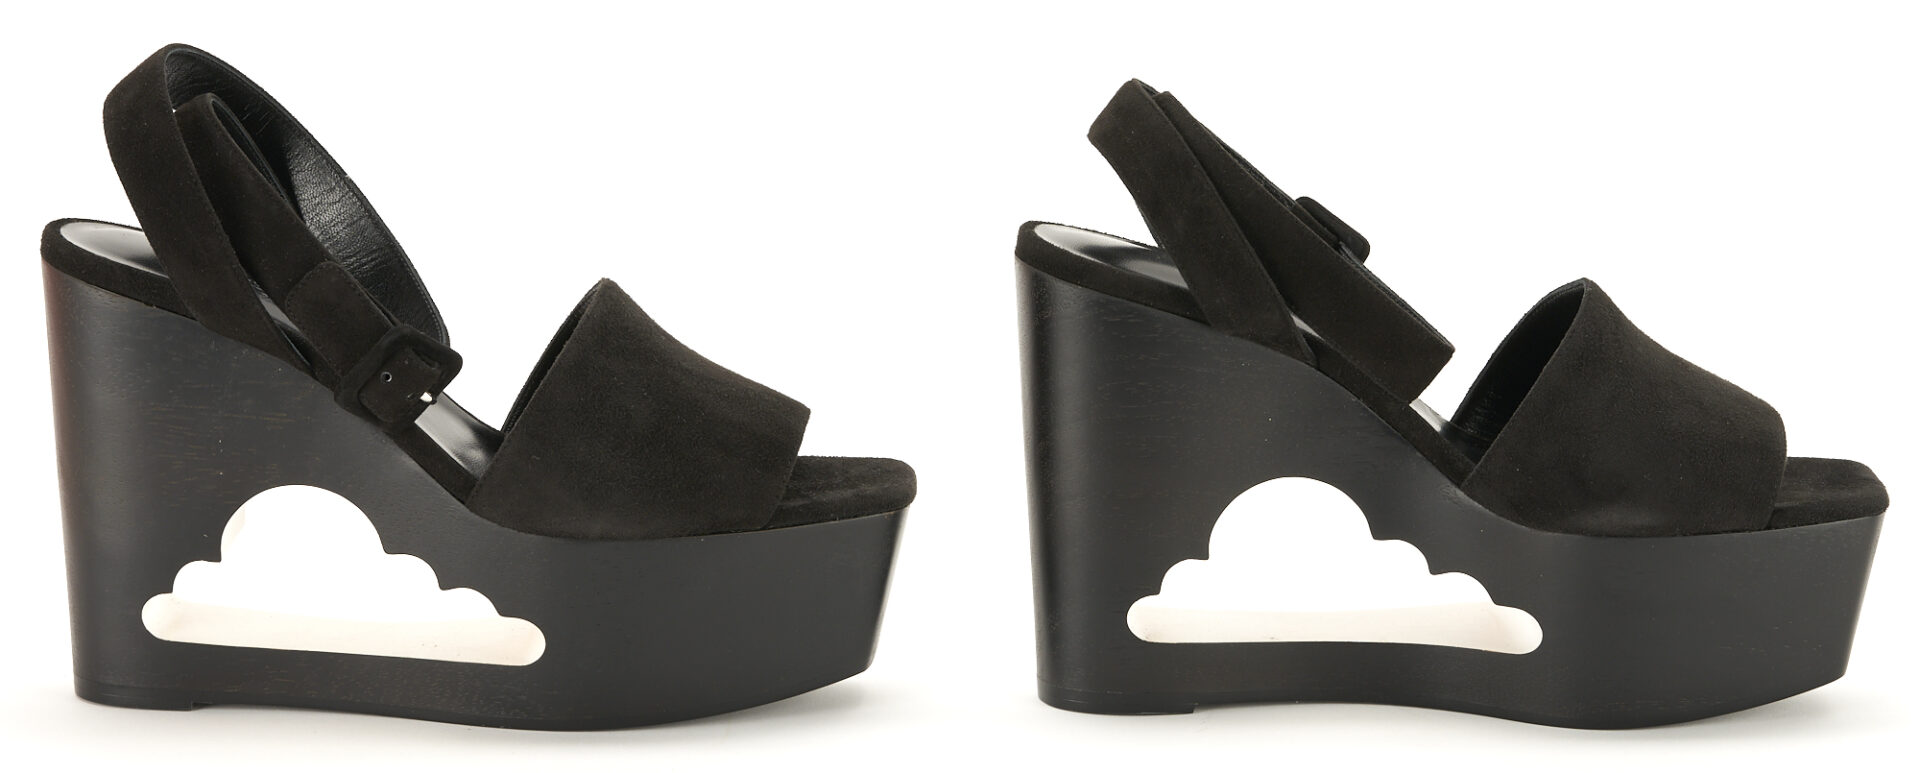 Lot 1171: 2 Pairs Limited Edition Hermes Heels, incl. Cloud Sandal